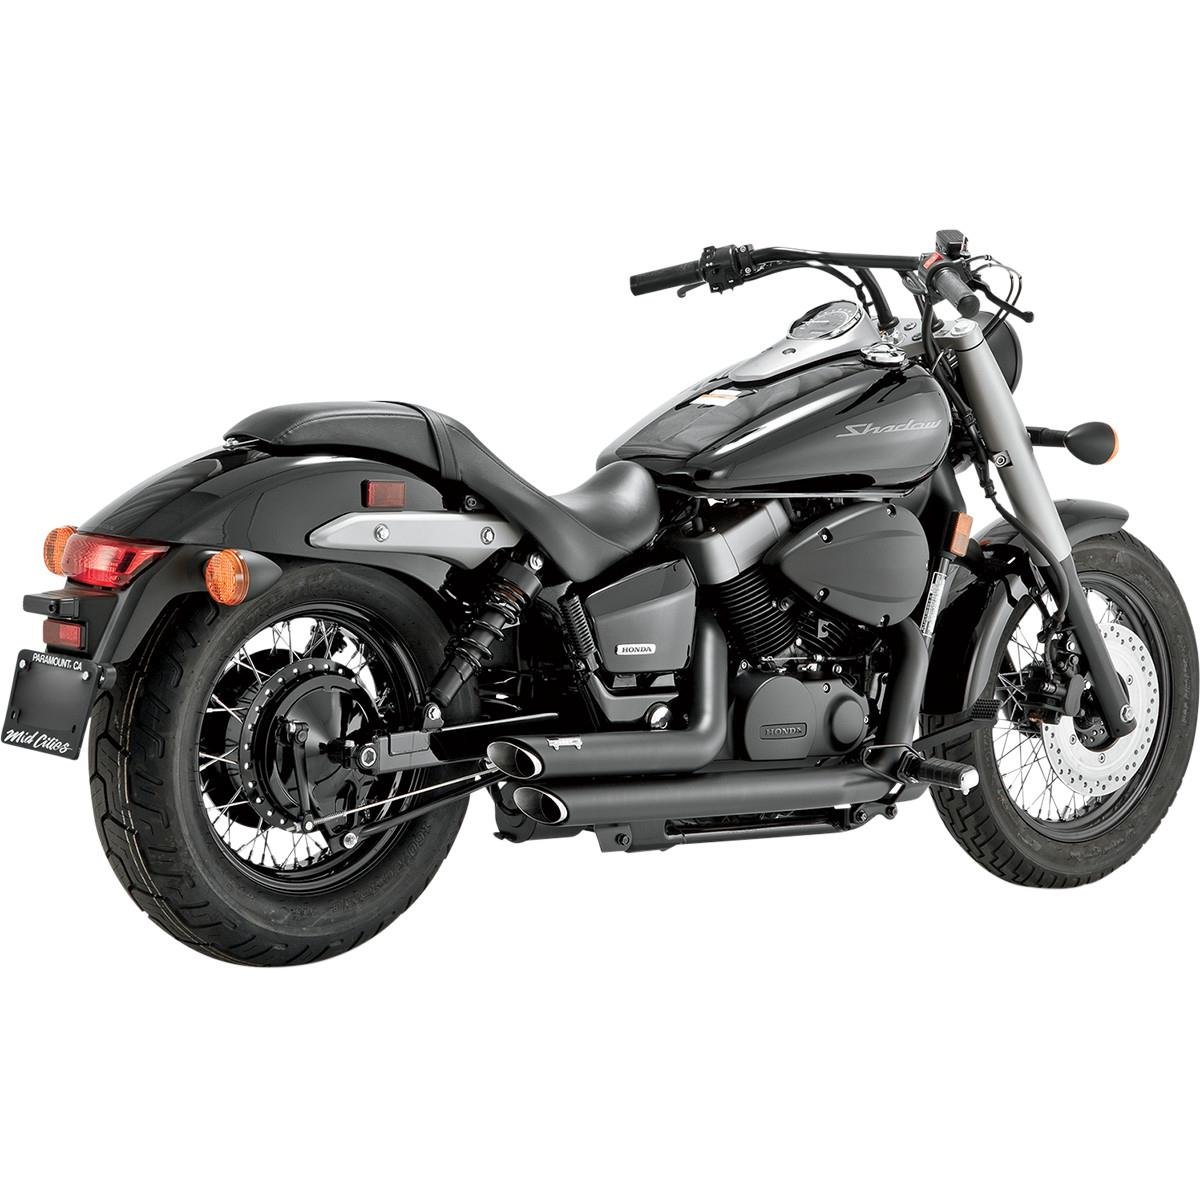 Honda shadow 750  An Affordable and Reliable Vtwin Cruiser